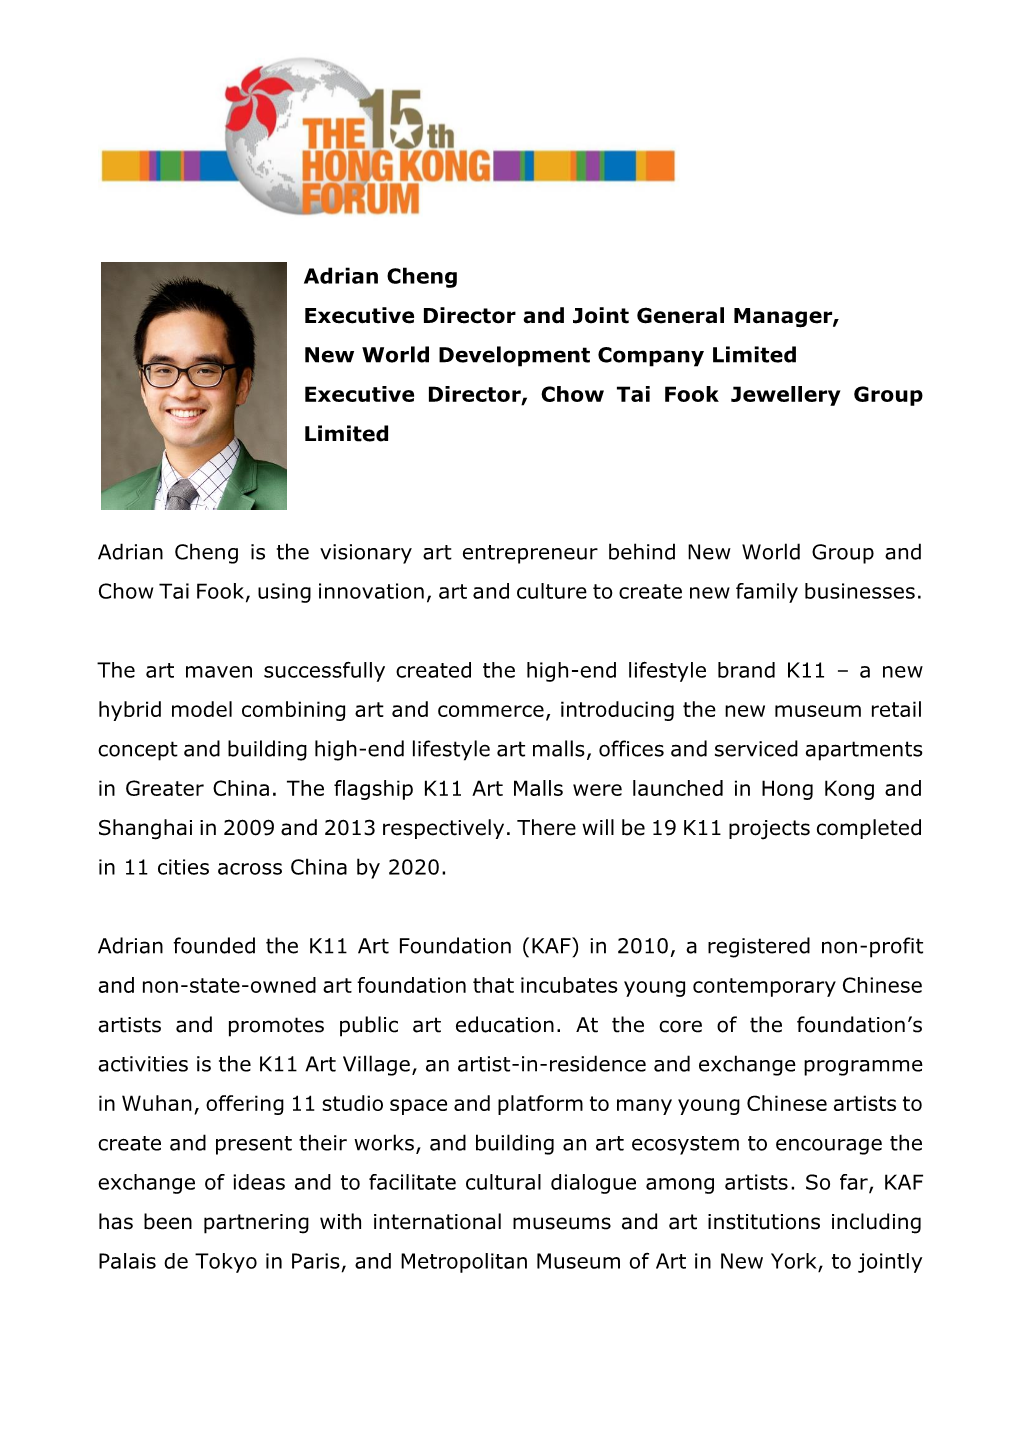 Adrian Cheng Executive Director and Joint General Manager, New World Development Company Limited Executive Director, Chow Tai Fook Jewellery Group Limited